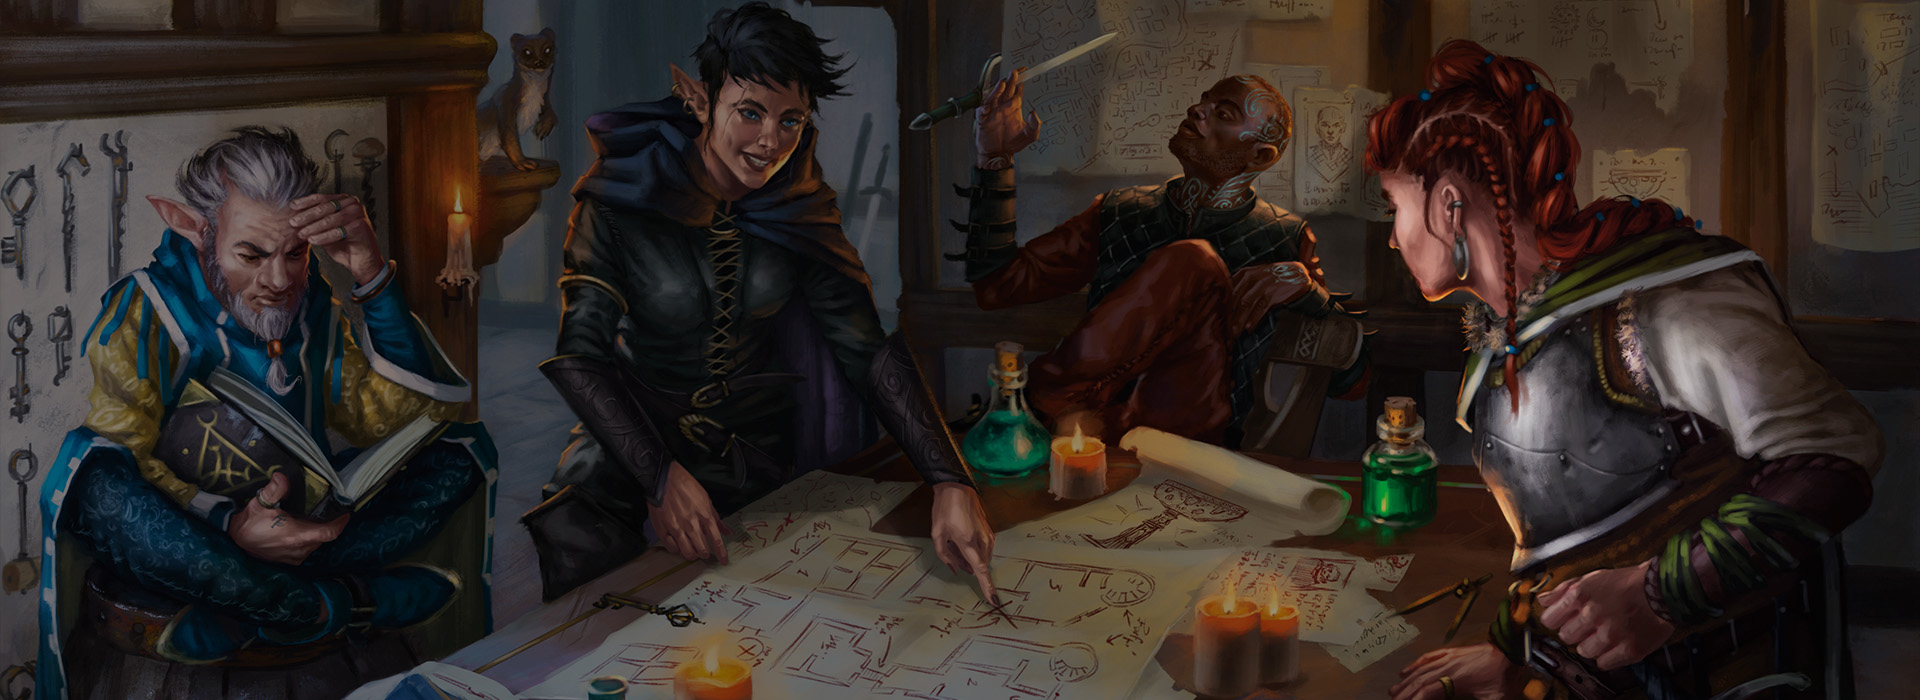 D&D Beyond will officially join Wizards of the Coast in $146.3M acquisition  – GeekWire